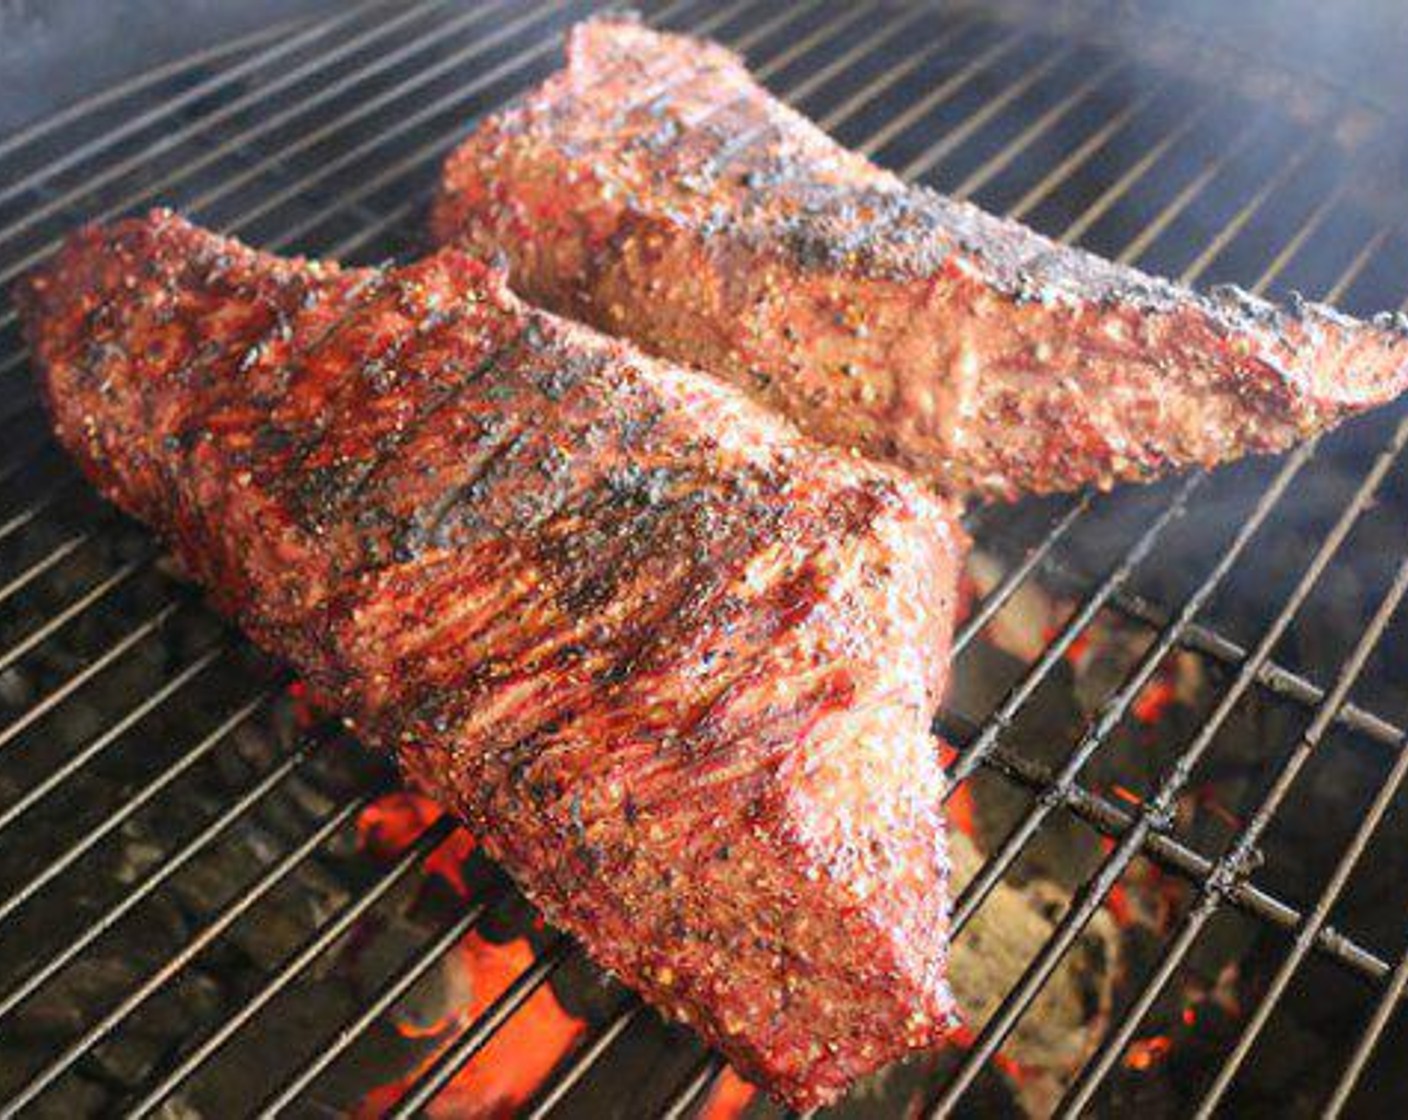 step 4 Place Tri Tip on grill and insert probe thermometer set for 115 degrees F (46 degrees C). Cook Tri Tip for 25-30 minutes or until internal temp reaches 115 degrees F (46 degrees C).